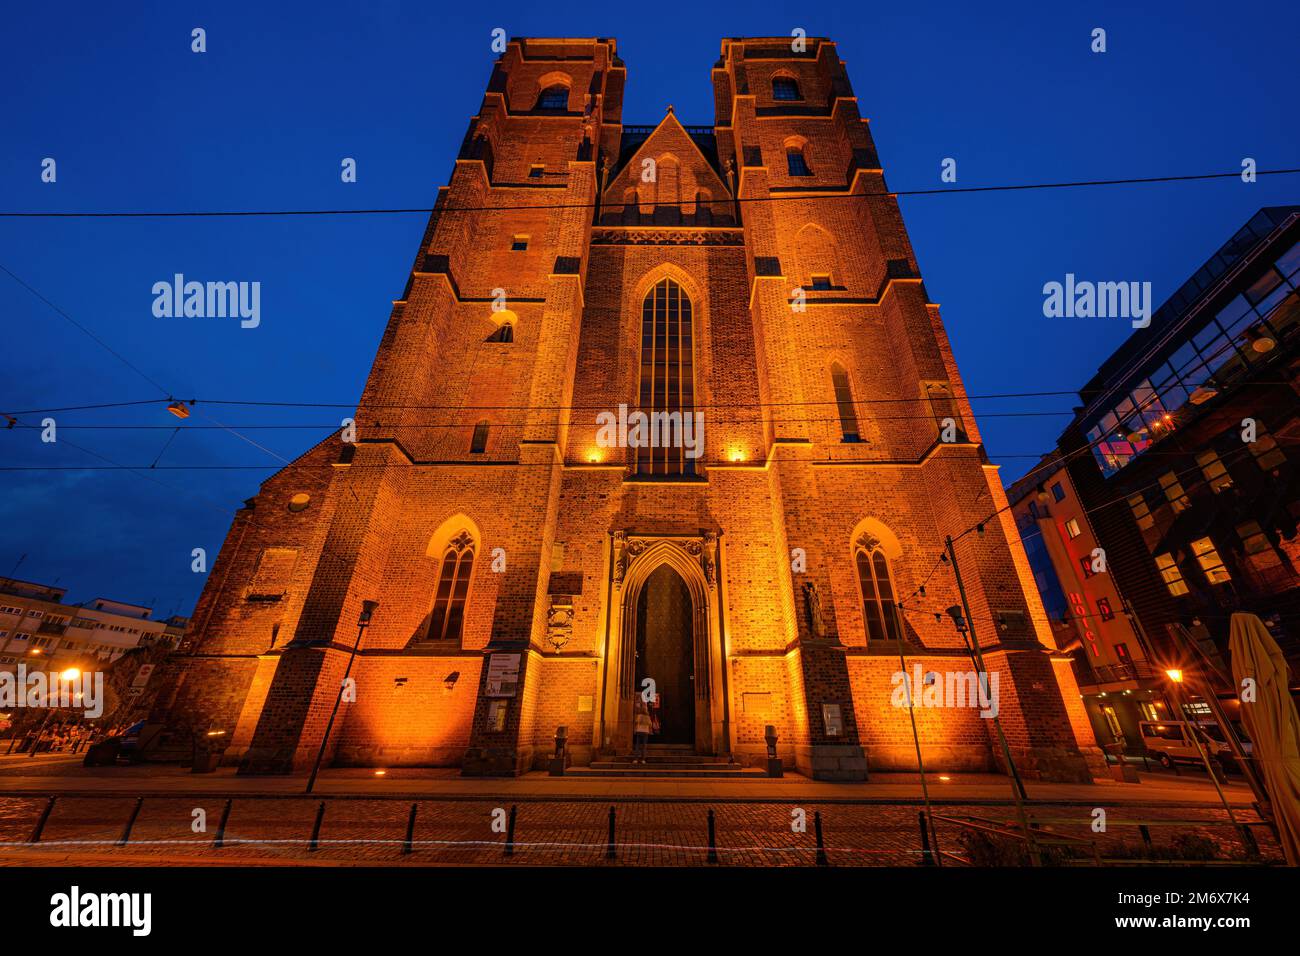 St. Mary Magdalene's Church in Wroclaw Poland. Night photo Stock Photo